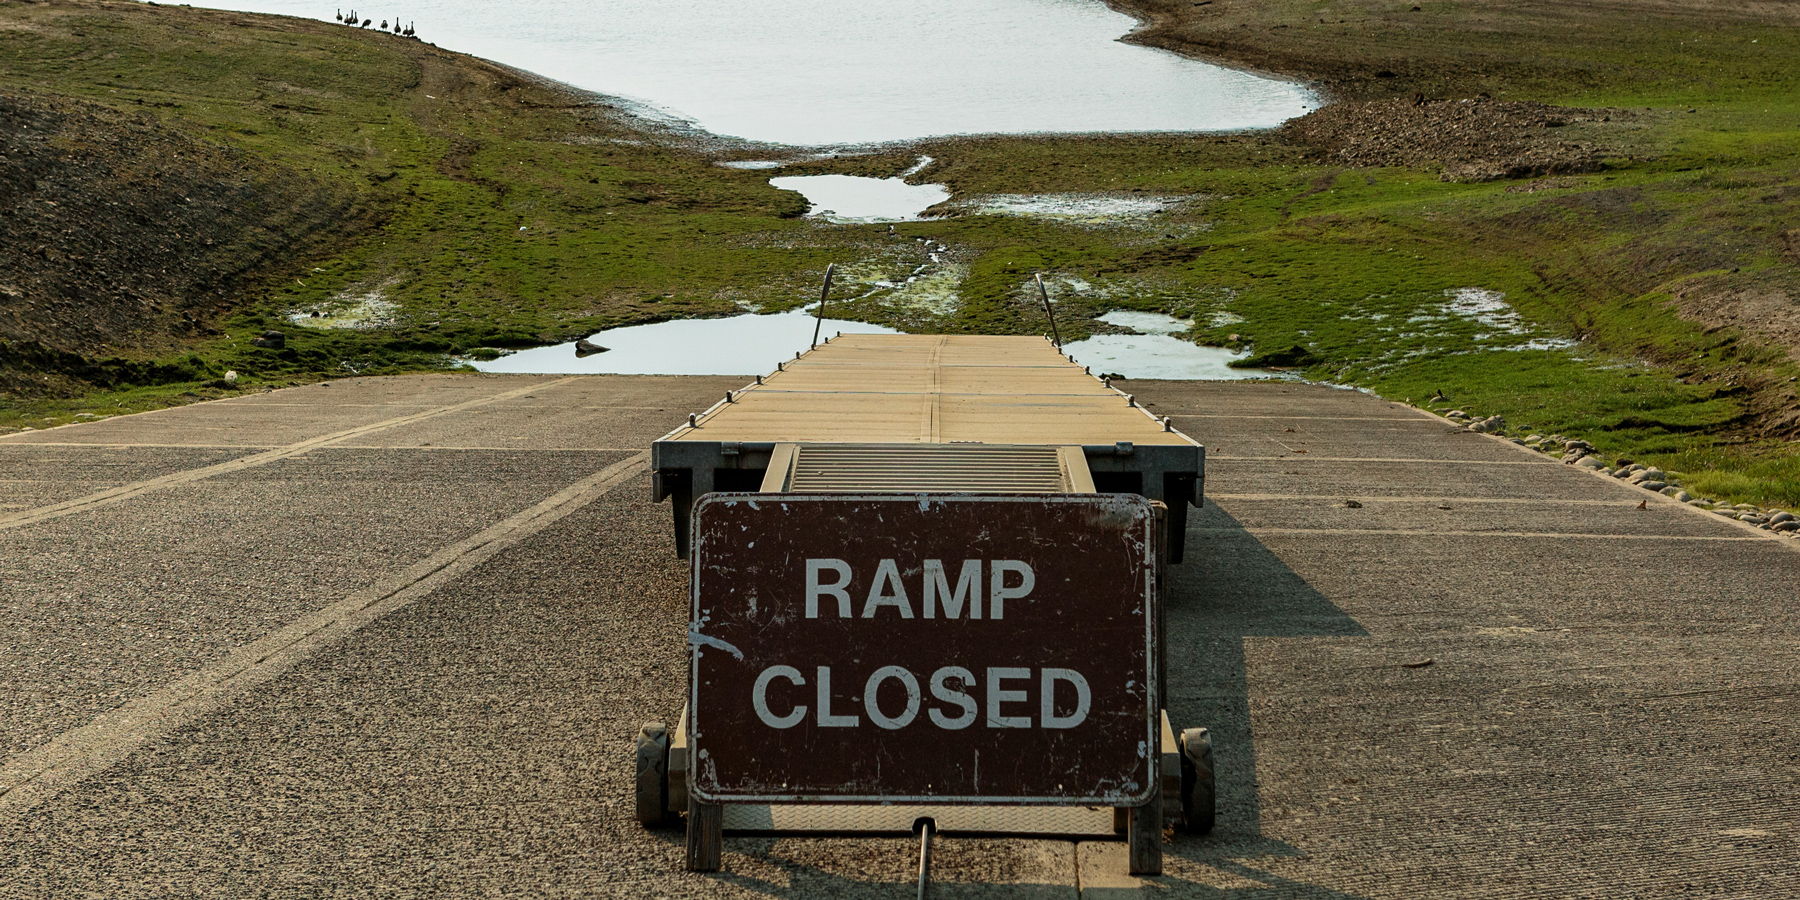 A ramp closed sign sits at the foot of a boat ramp.